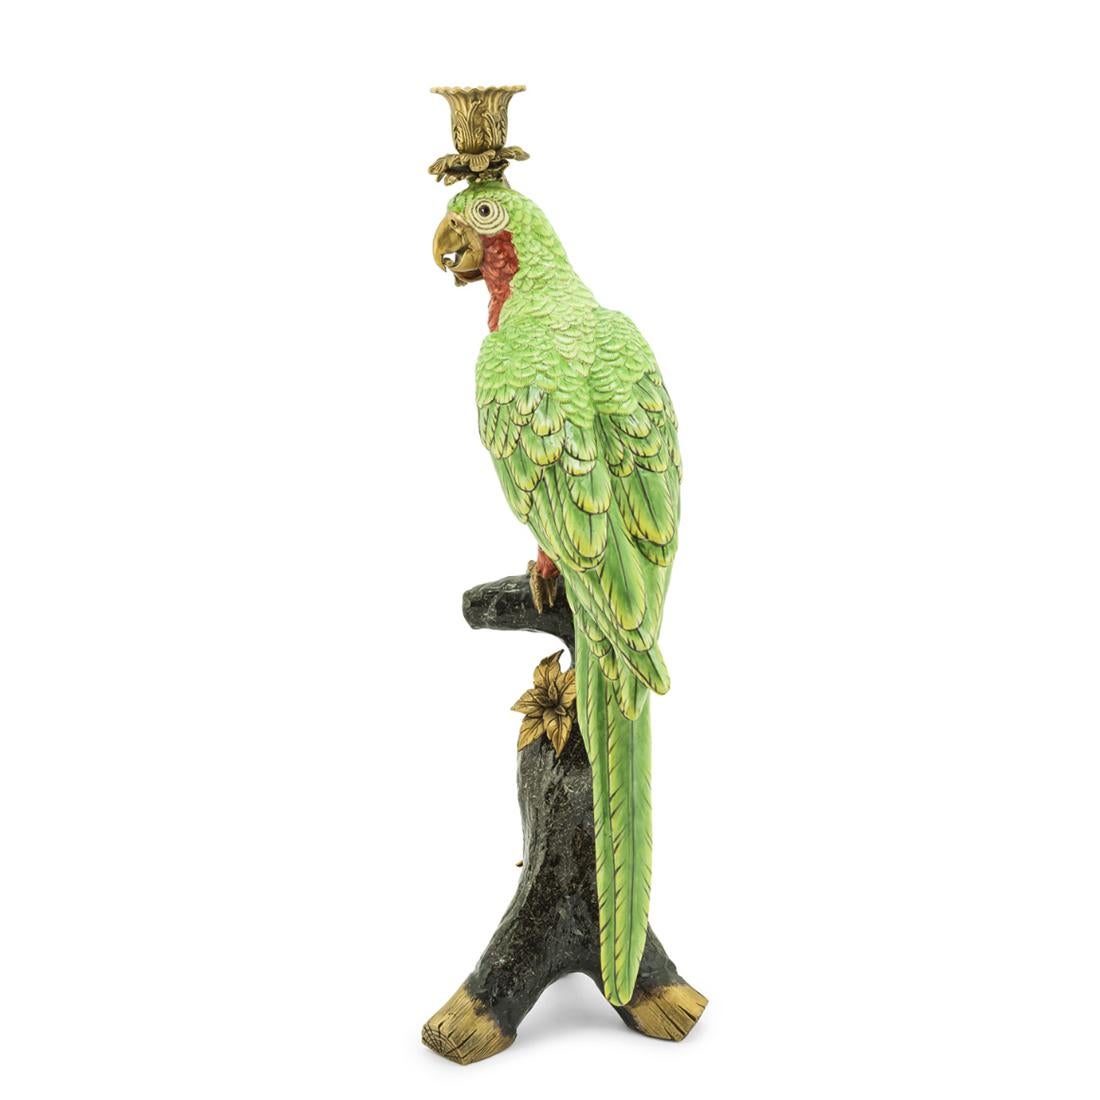 Candleholder green parrot sculpture in
hand painted porcelain with brass details.
For 1 candle. Candle not included.